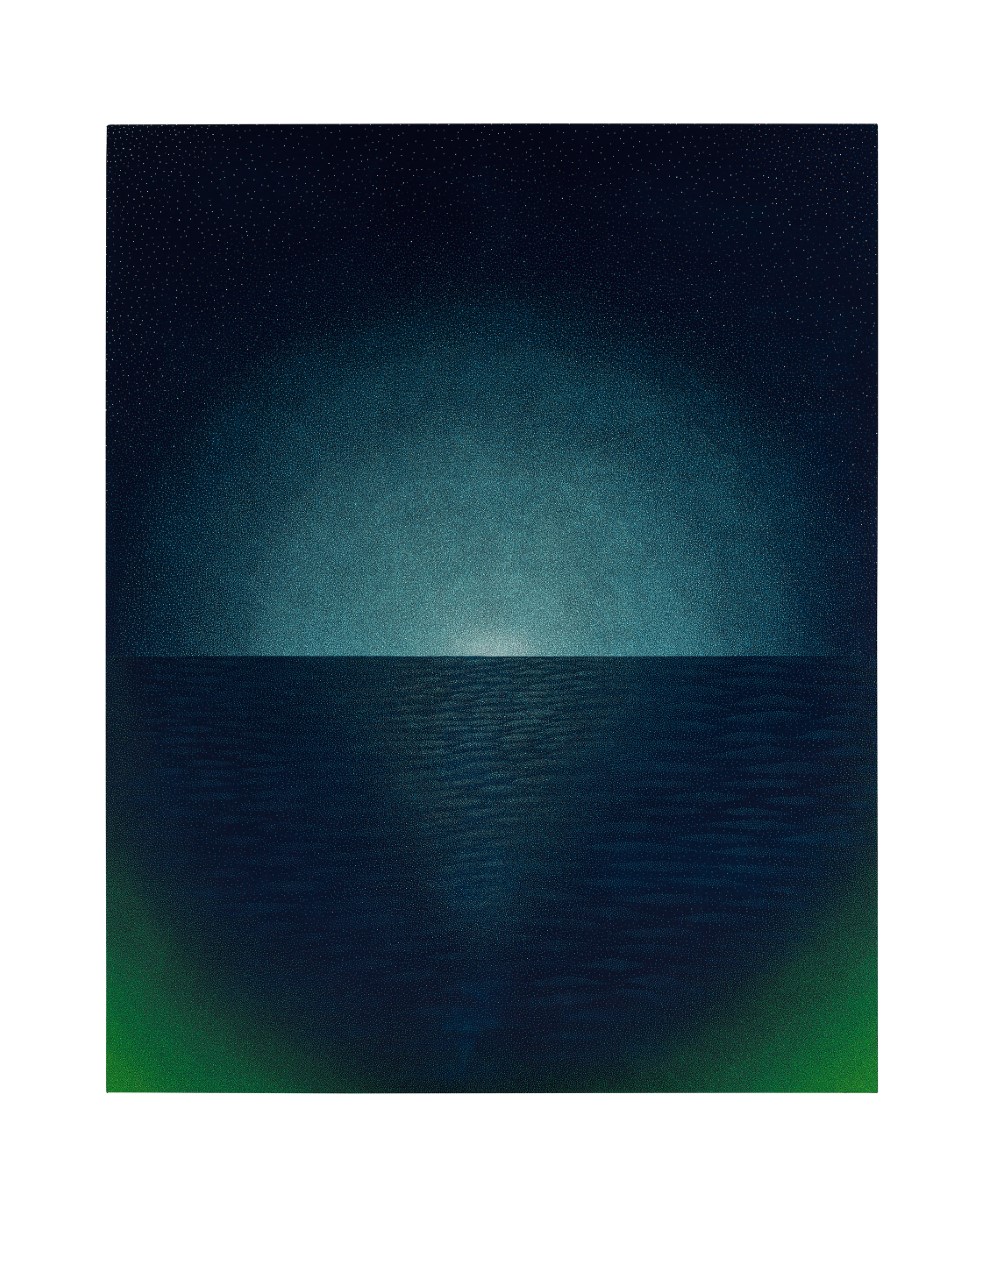 A painting of an ocean at night.